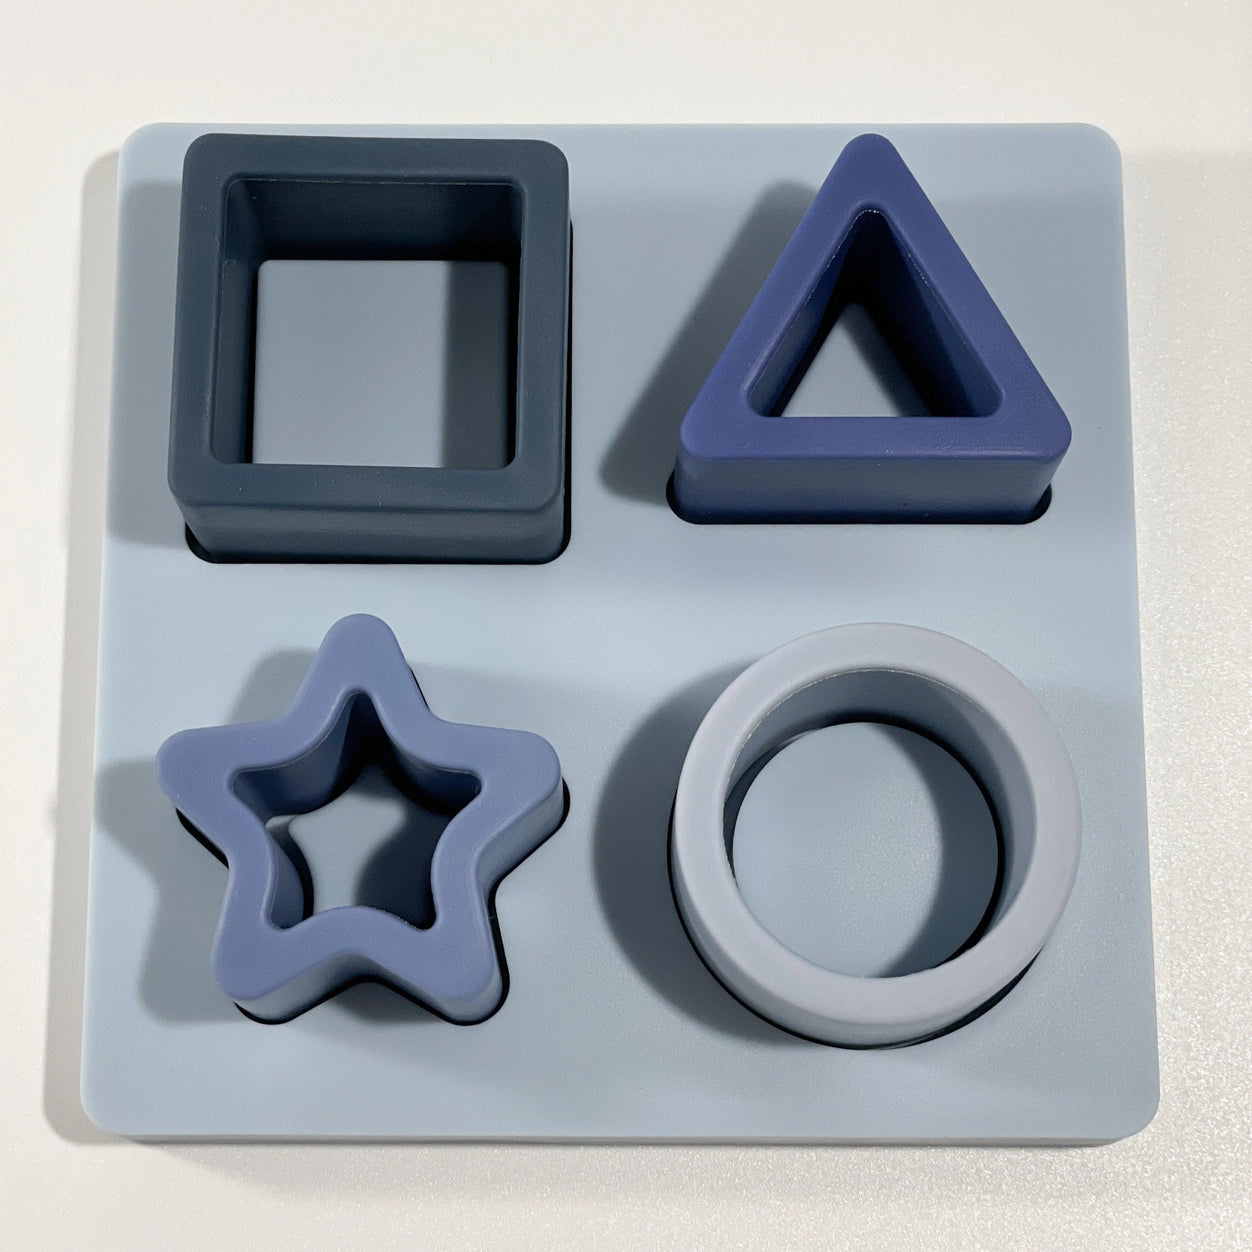 Silicone Shape Puzzle Toy